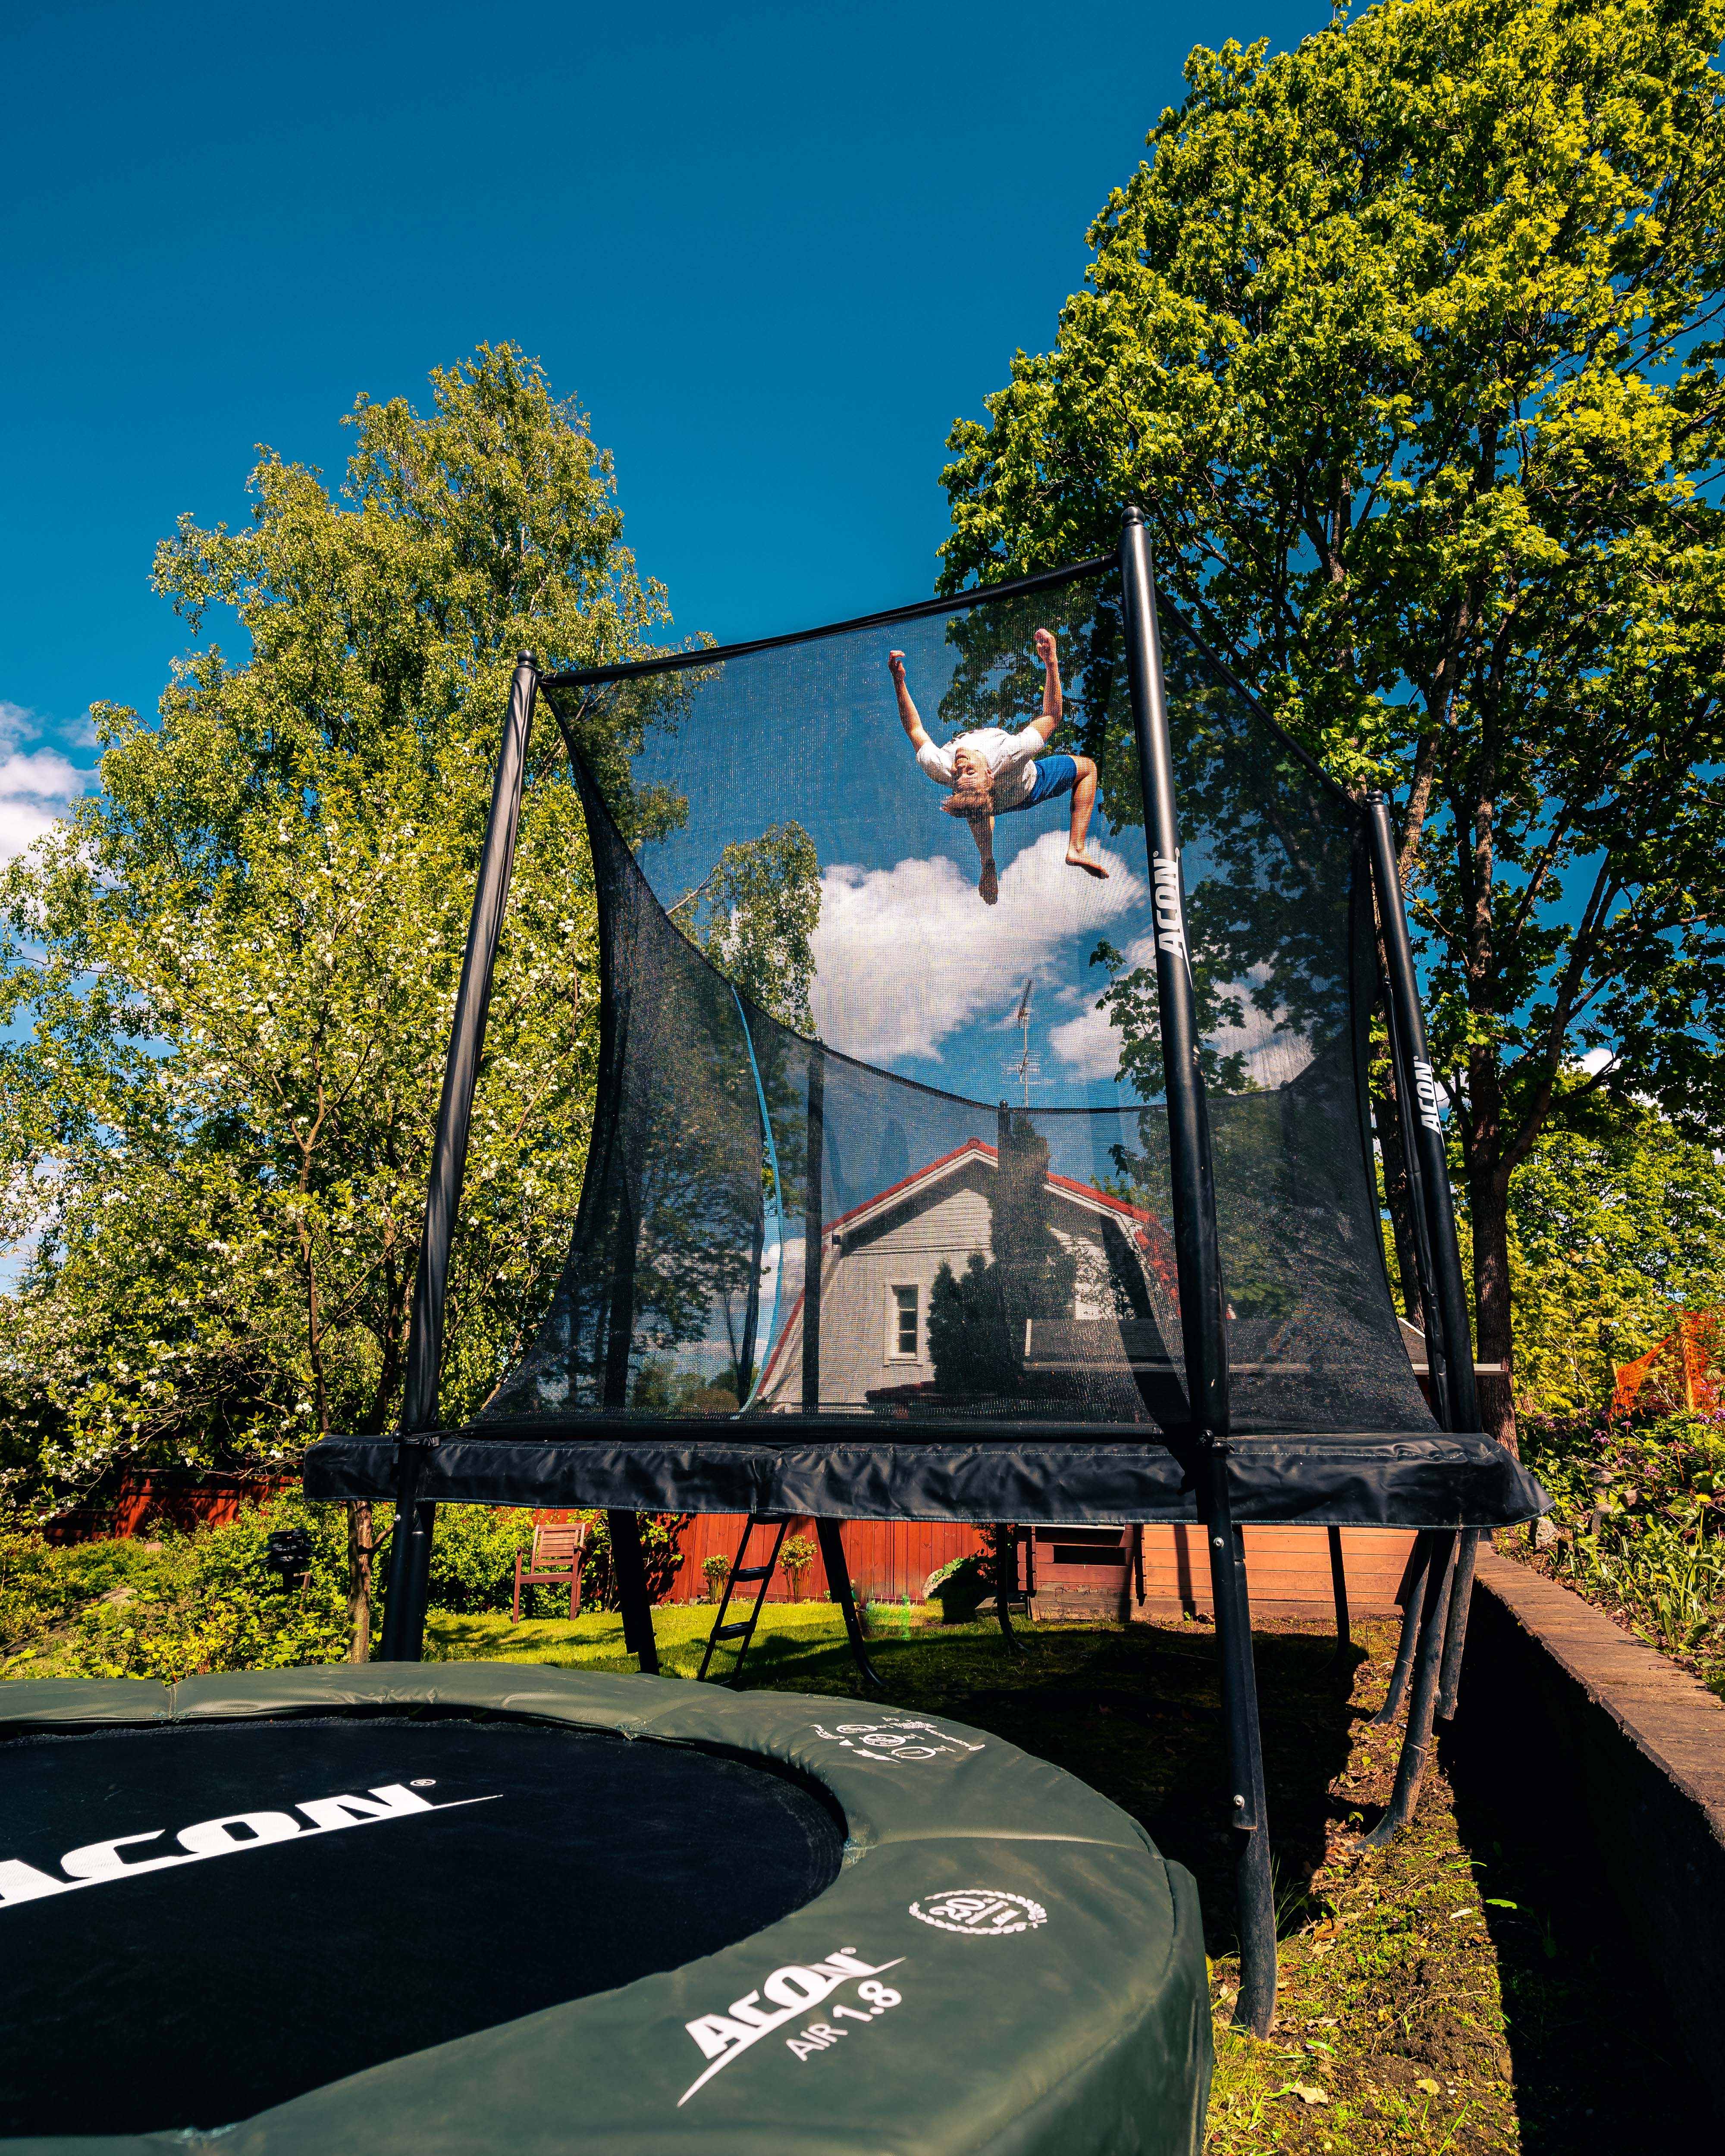 A young guy doing a flip on a rectangular trampoline with net